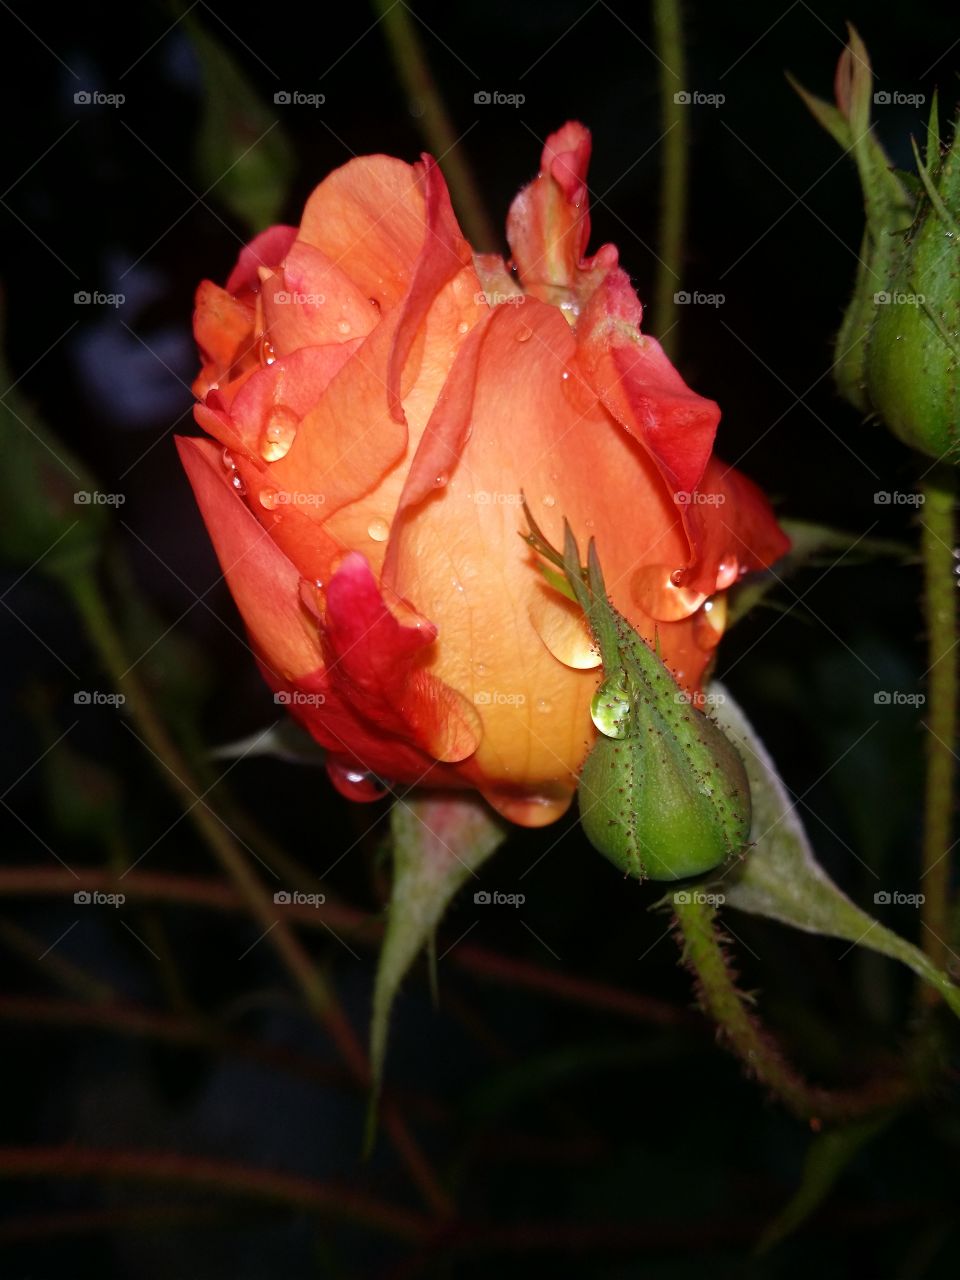 A delicate rose blooming in a cold rainy day. Life is stronger than everything.